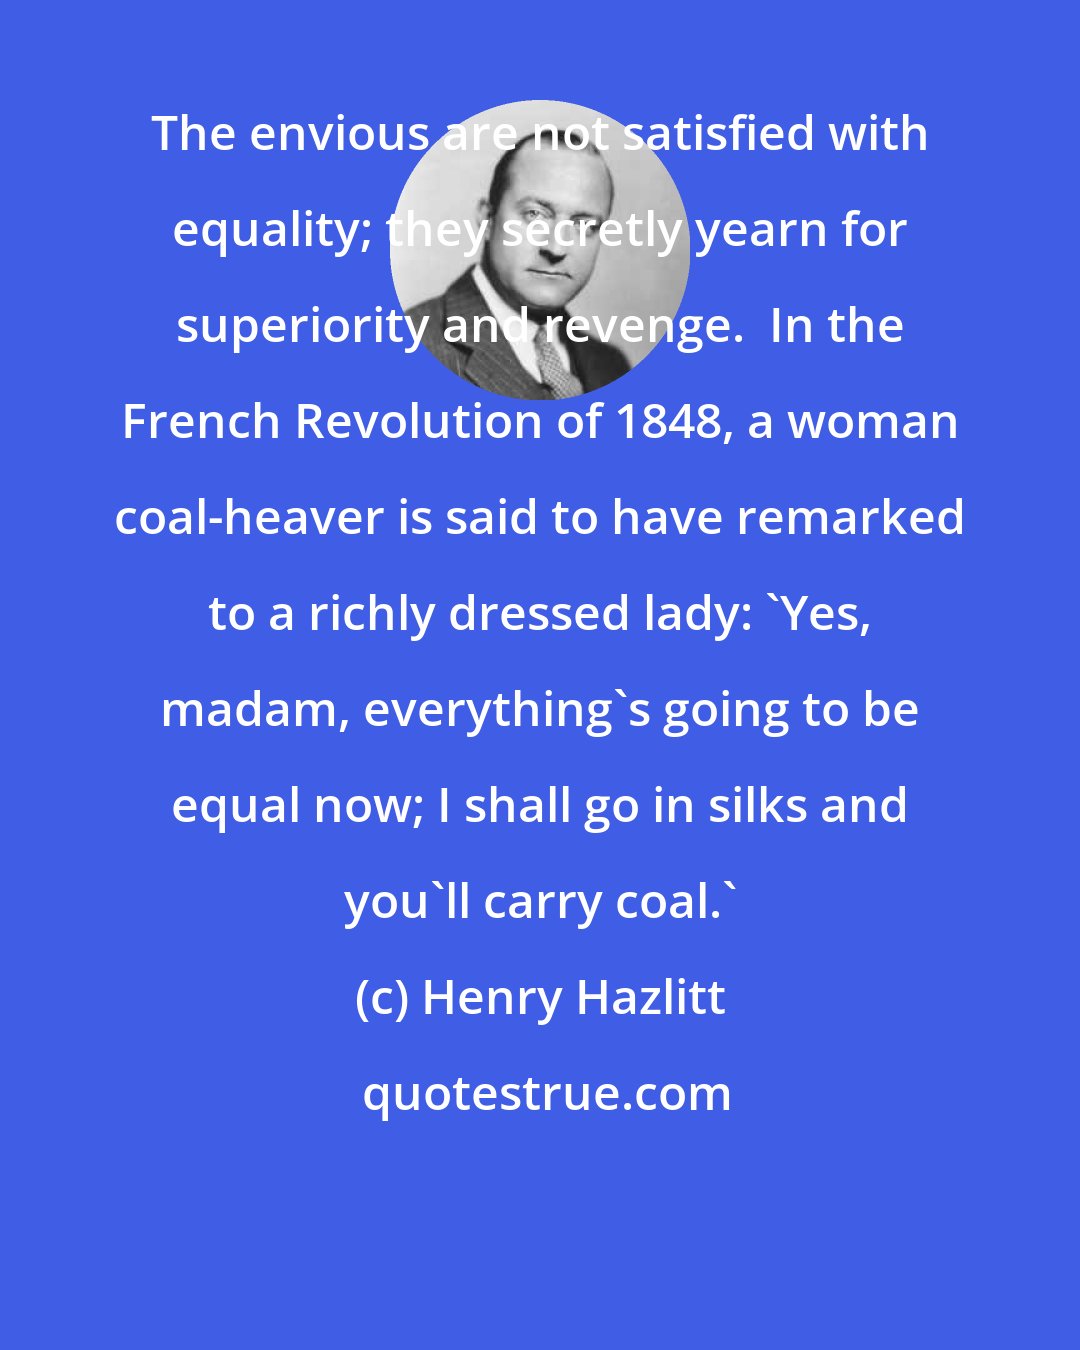 Henry Hazlitt: The envious are not satisfied with equality; they secretly yearn for superiority and revenge.  In the French Revolution of 1848, a woman coal-heaver is said to have remarked to a richly dressed lady: 'Yes, madam, everything's going to be equal now; I shall go in silks and you'll carry coal.'